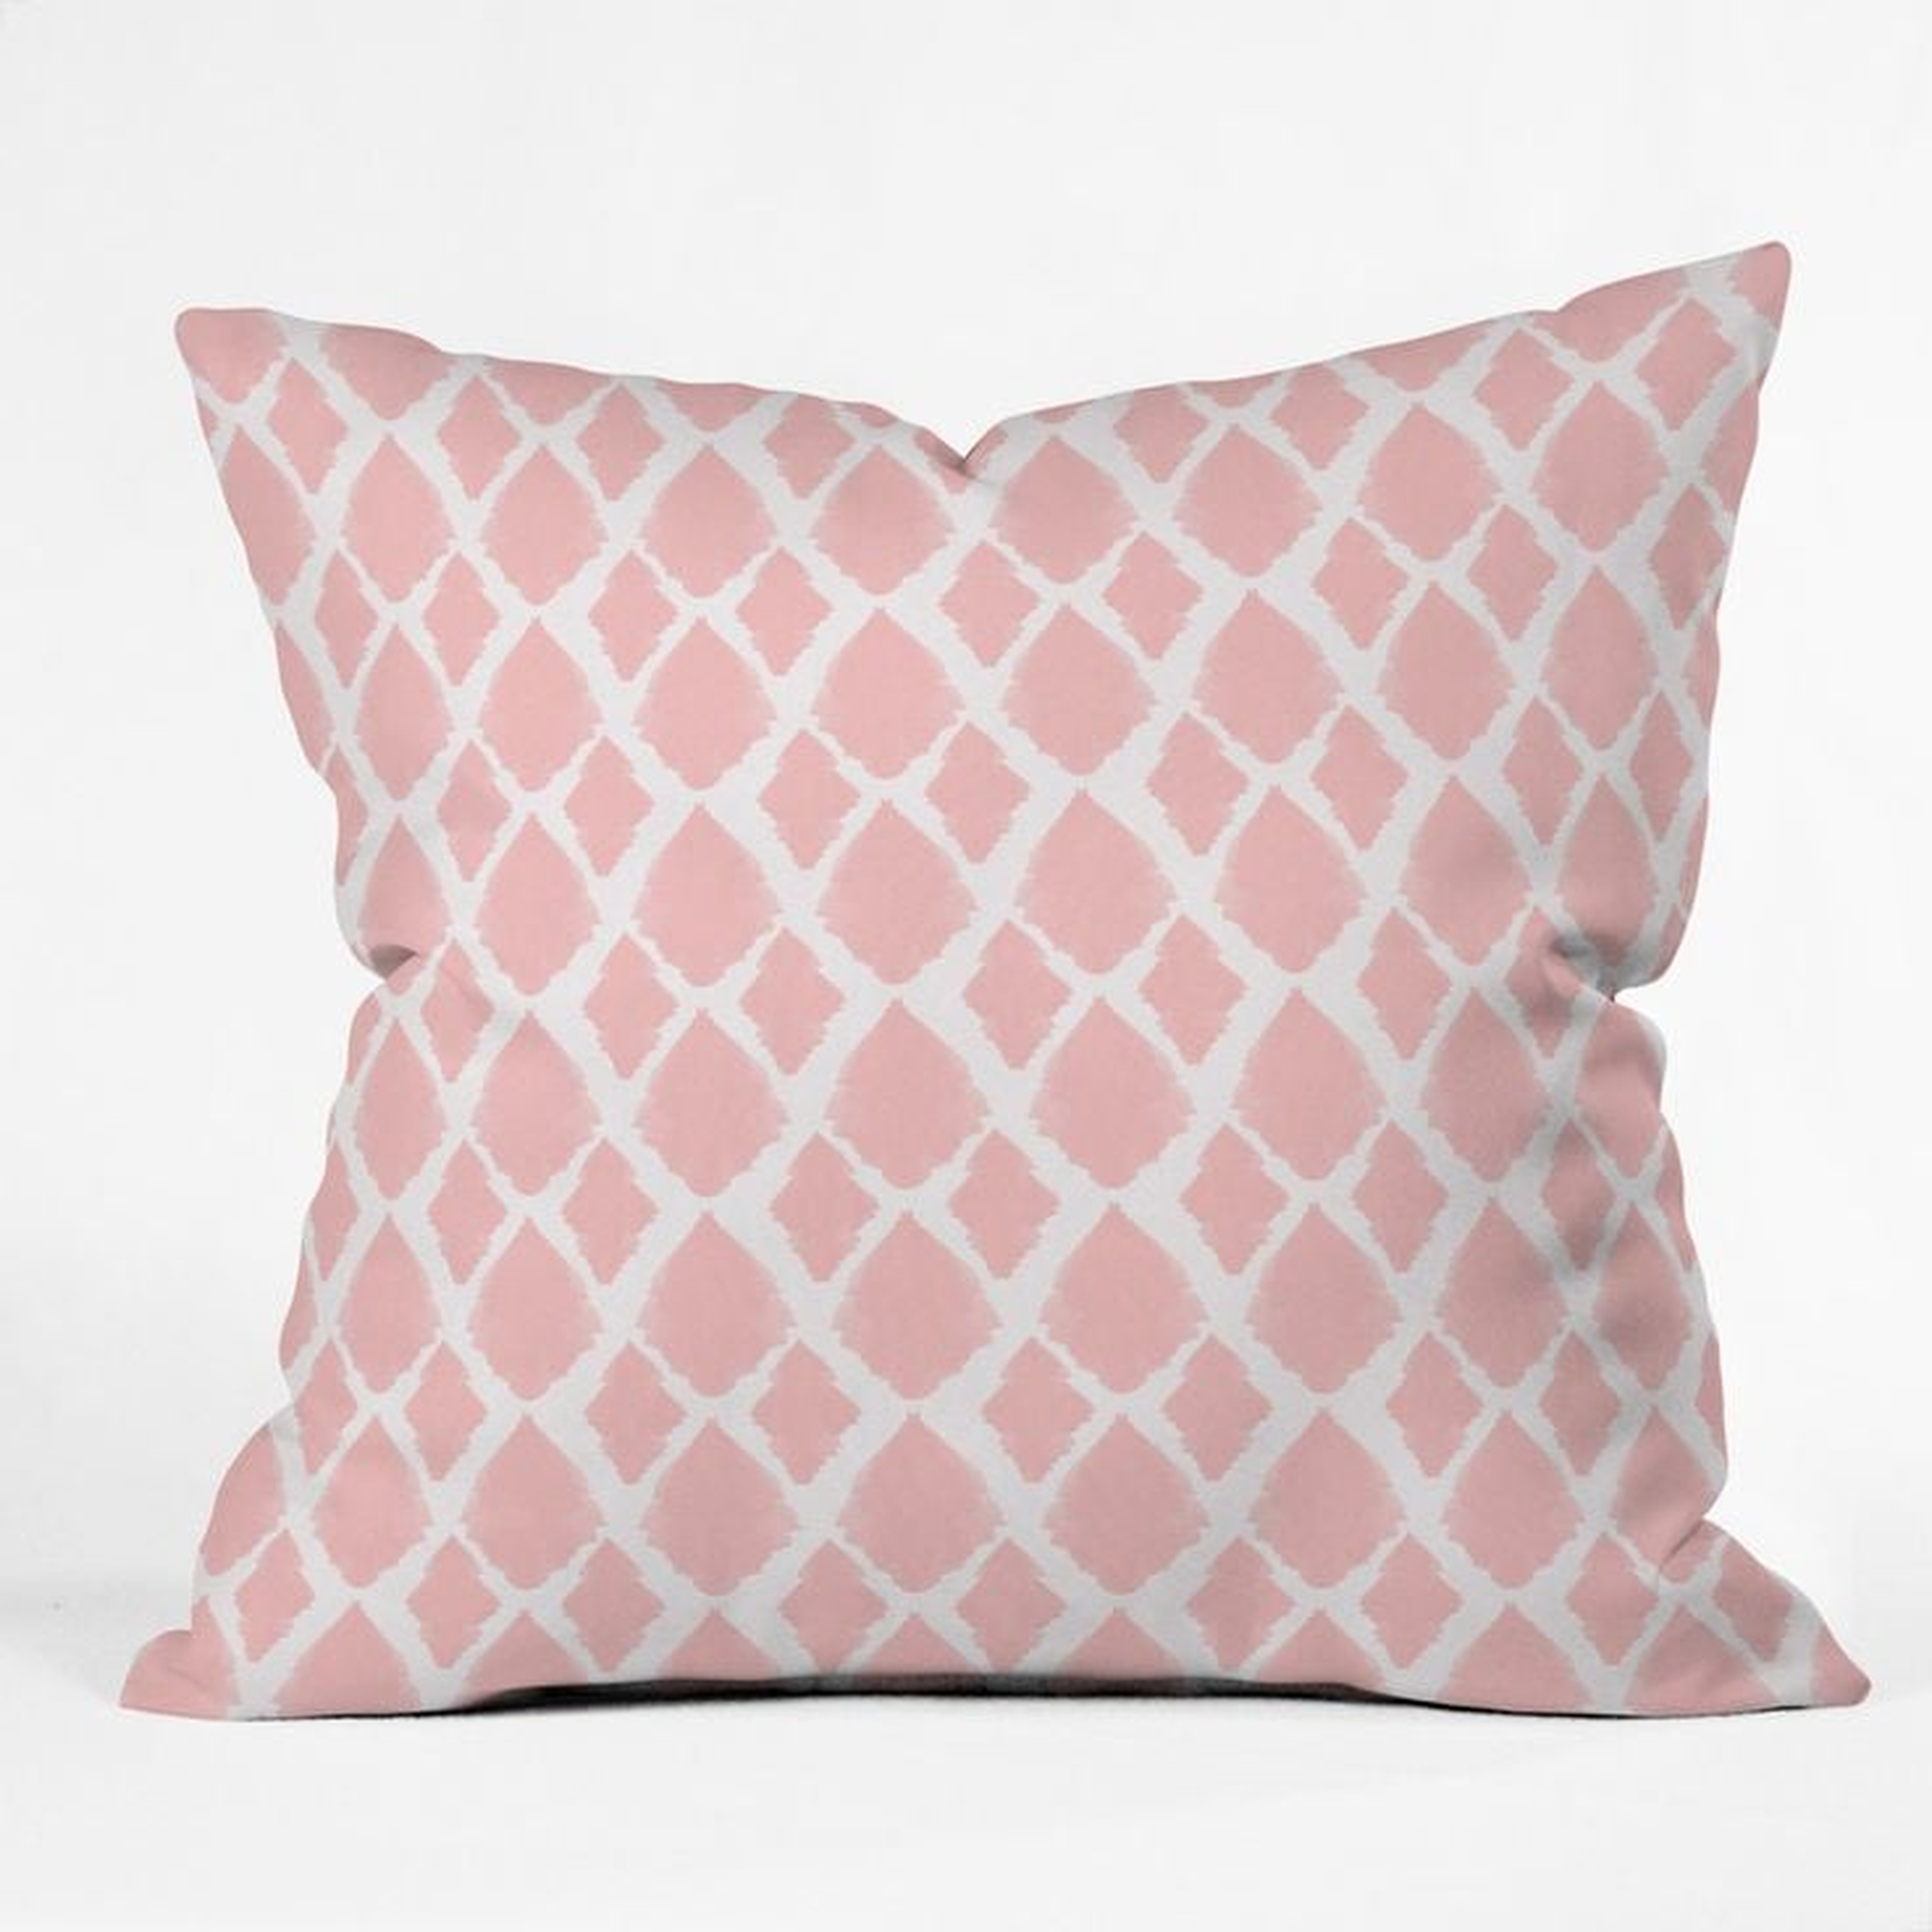 Blushed Ikat - 18" x 18"-Pink -With Insert - Wander Print Co.